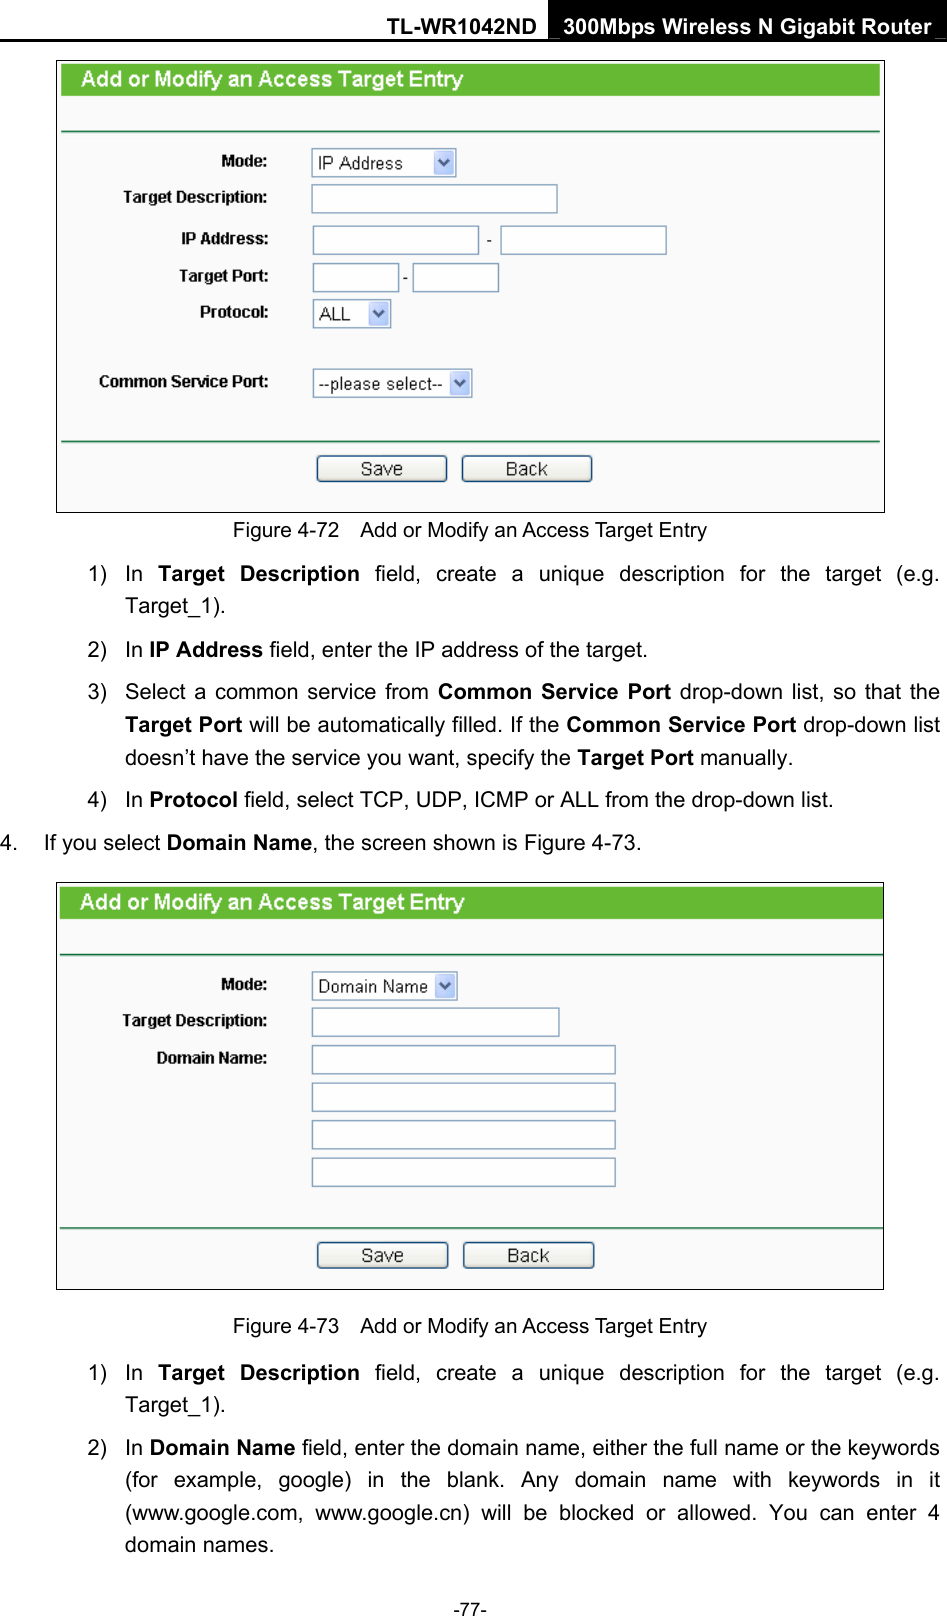 TL-WR1042ND 300Mbps Wireless N Gigabit Router -77-  Figure 4-72    Add or Modify an Access Target Entry 1) In Target Description field, create a unique description for the target (e.g. Target_1). 2) In IP Address field, enter the IP address of the target. 3)  Select a common service from Common Service Port drop-down list, so that the Target Port will be automatically filled. If the Common Service Port drop-down list doesn’t have the service you want, specify the Target Port manually. 4) In Protocol field, select TCP, UDP, ICMP or ALL from the drop-down list.  4.  If you select Domain Name, the screen shown is Figure 4-73.  Figure 4-73    Add or Modify an Access Target Entry 1) In Target Description field, create a unique description for the target (e.g. Target_1). 2) In Domain Name field, enter the domain name, either the full name or the keywords (for example, google) in the blank. Any domain name with keywords in it (www.google.com,  www.google.cn) will be blocked or allowed. You can enter 4 domain names. 